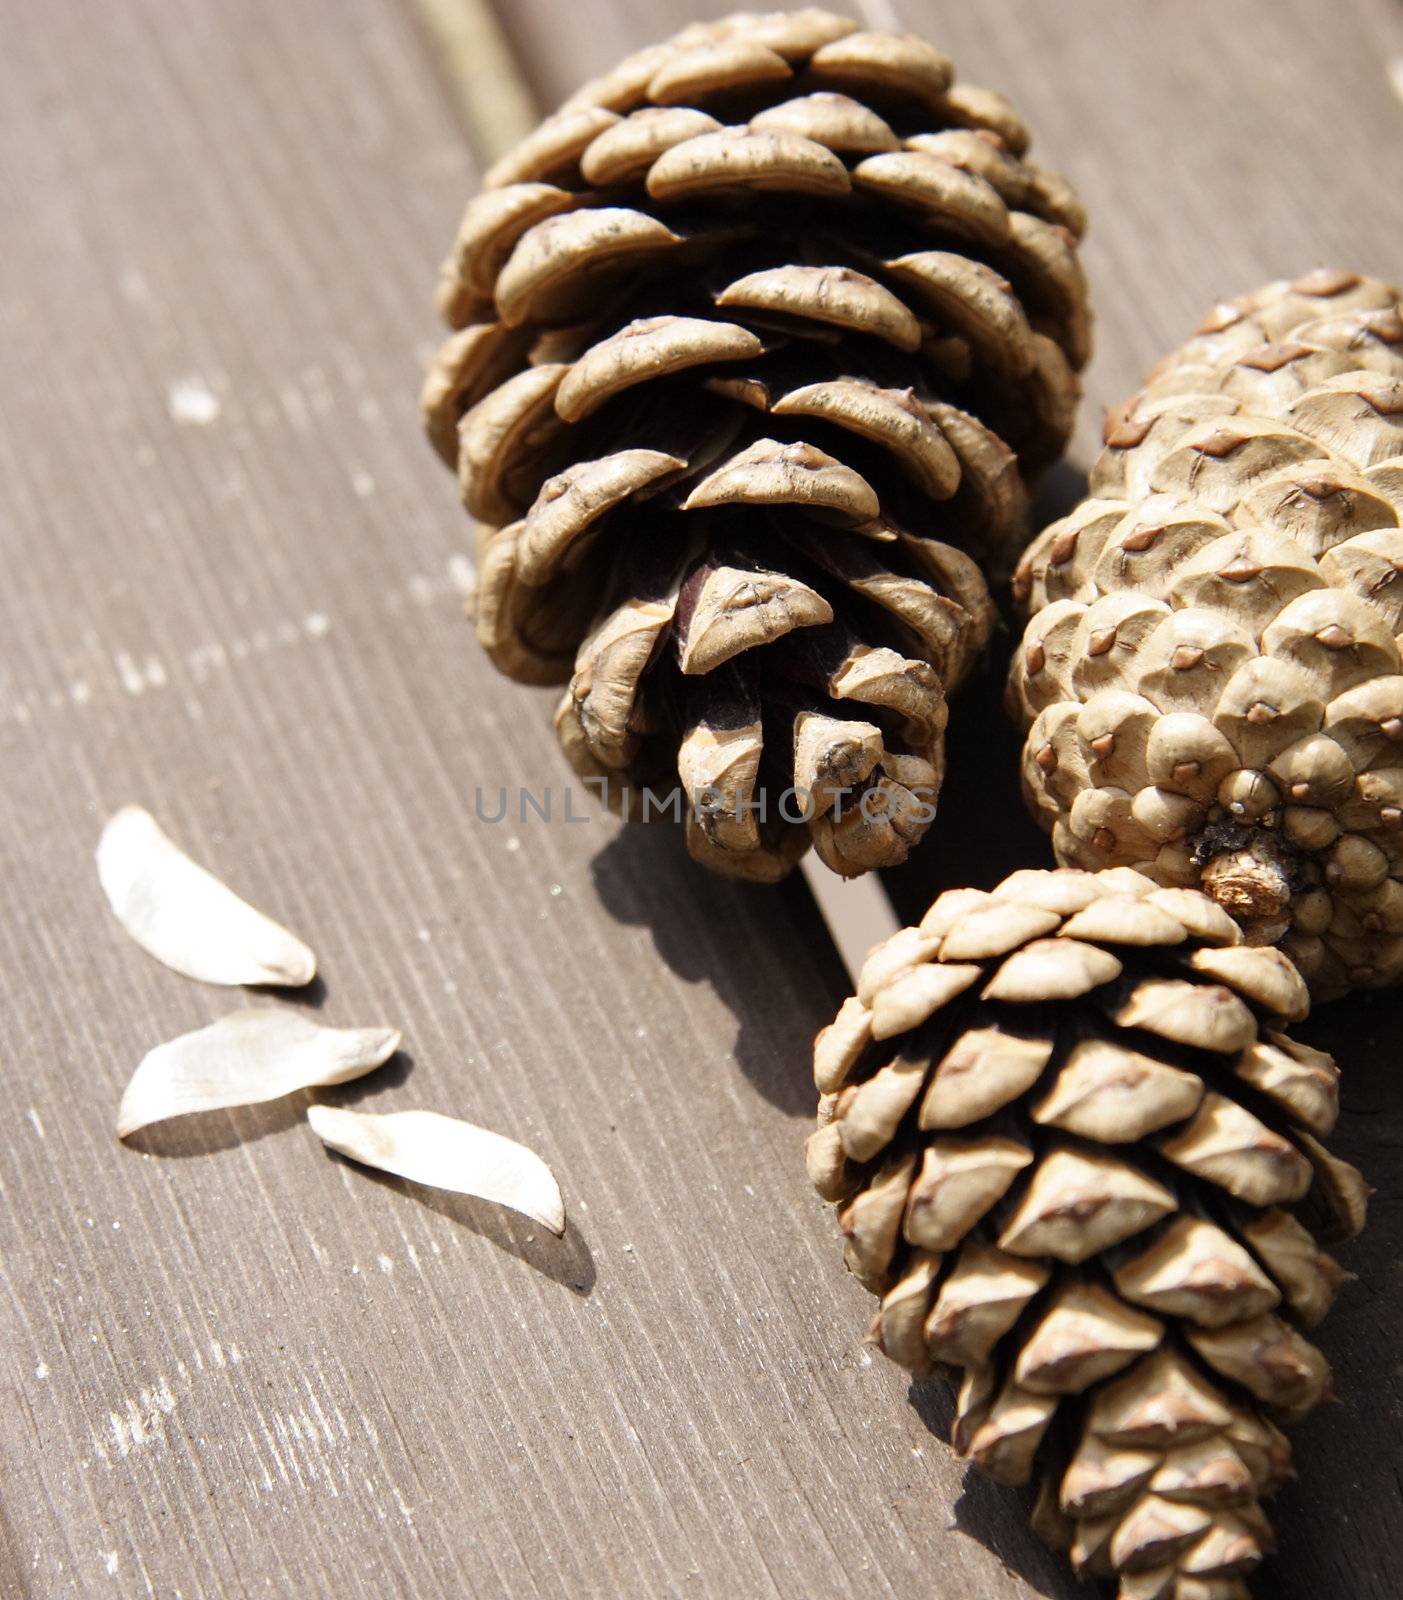 three fir cones and seeds out of them on a wooden table